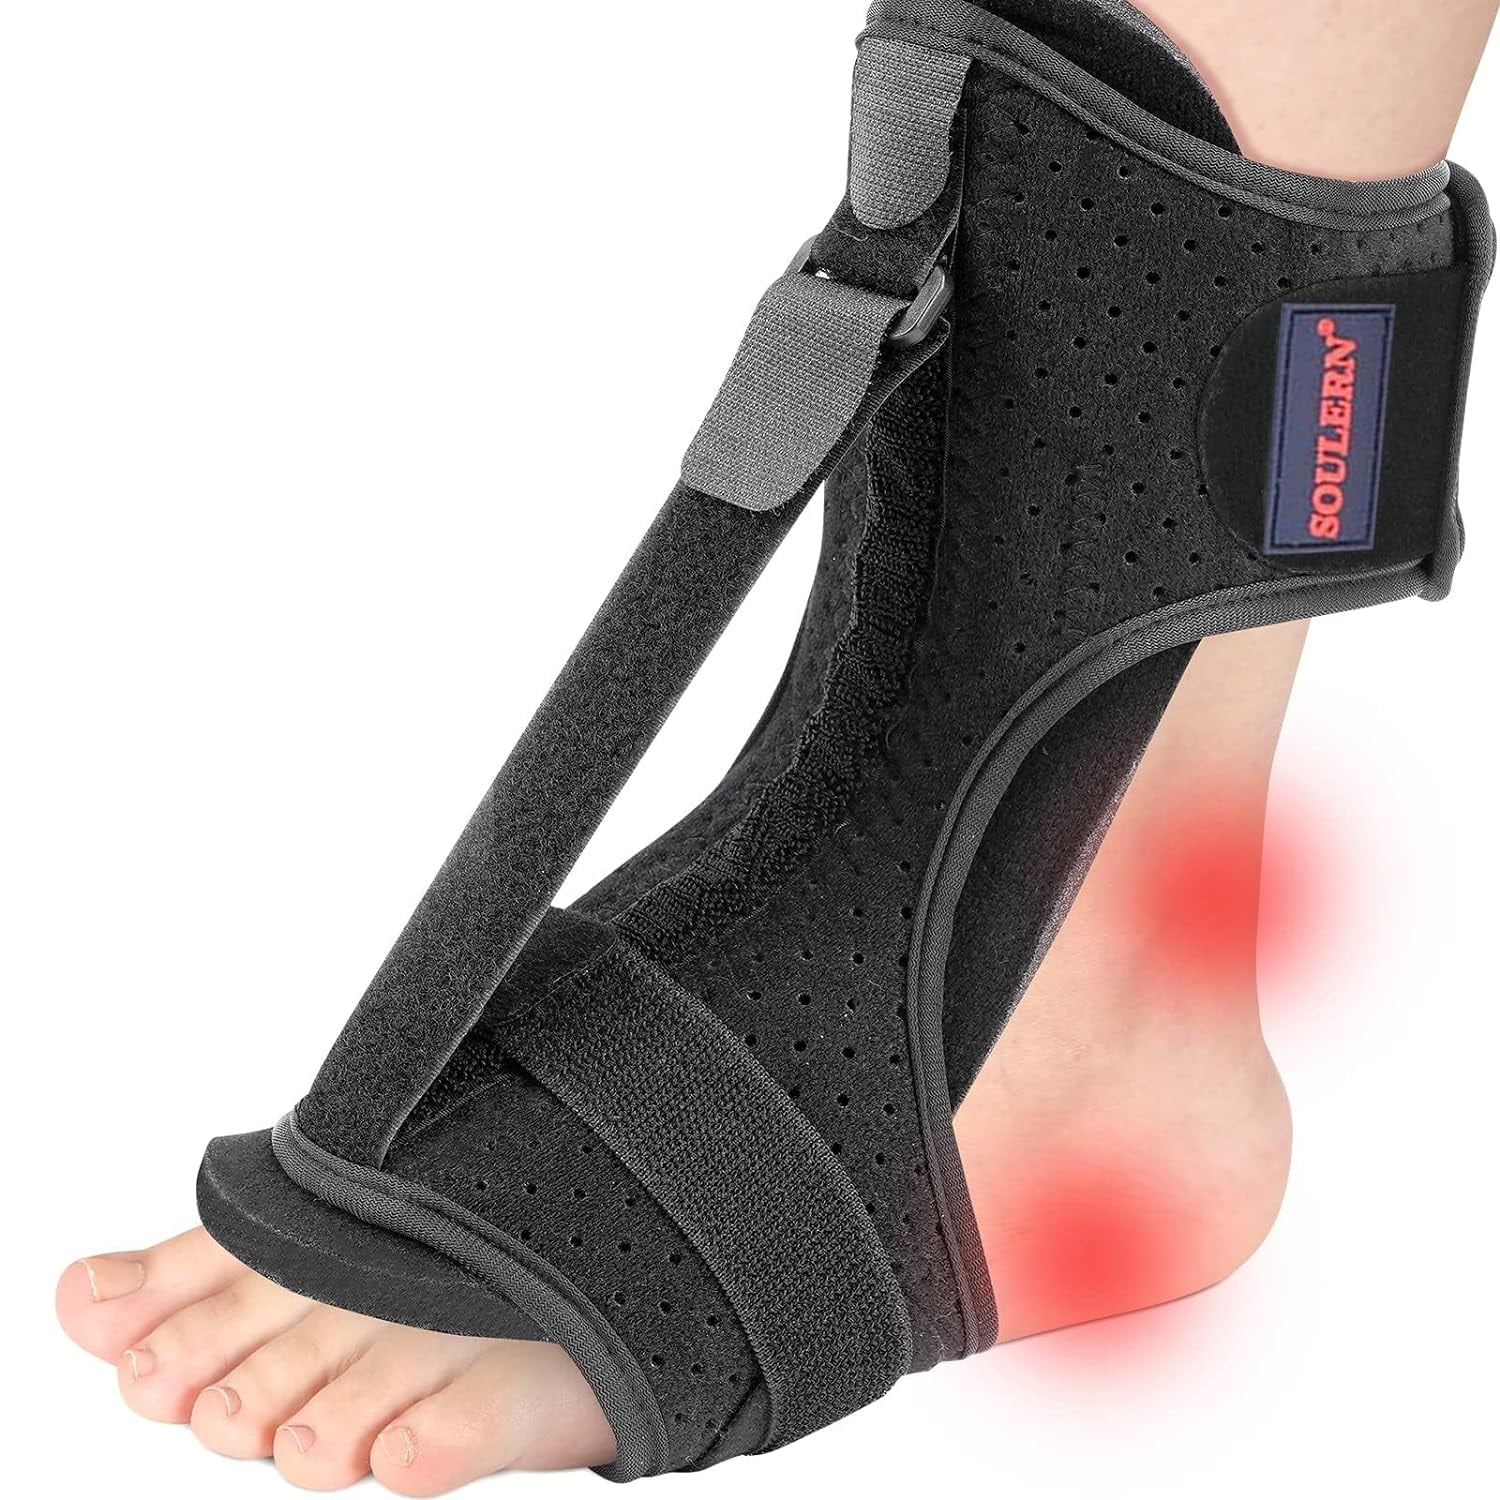 Soulern Plantar Fasciitis Night Splint Drop Foot Orthotic Brace,Improved  Dorsal for Effective Relief from Plantar Fasciitis, Achilles Tendonitis,  Ankle Pain 